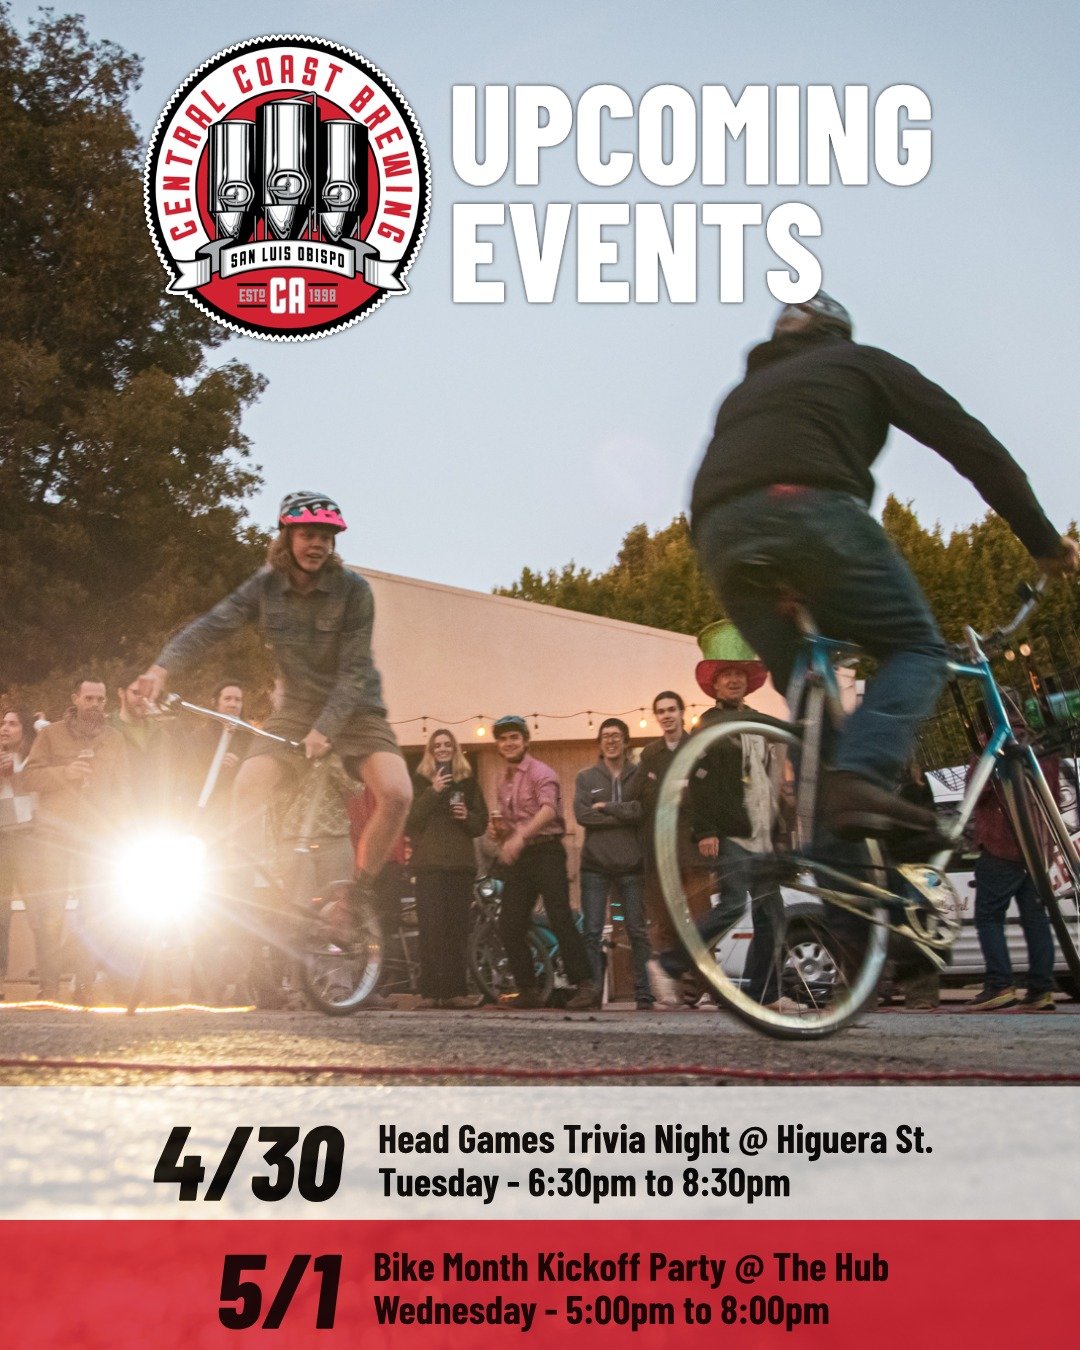 Exciting week ahead! Tonight at 6:30 pm on Higuera Street, join us for Tuesday Trivia Night with @headgamestrivia. Gather your team for a brain-teasing fun-filled evening with great brews and exciting prizes! Then, tomorrow from 5-8pm at The Hub, kic